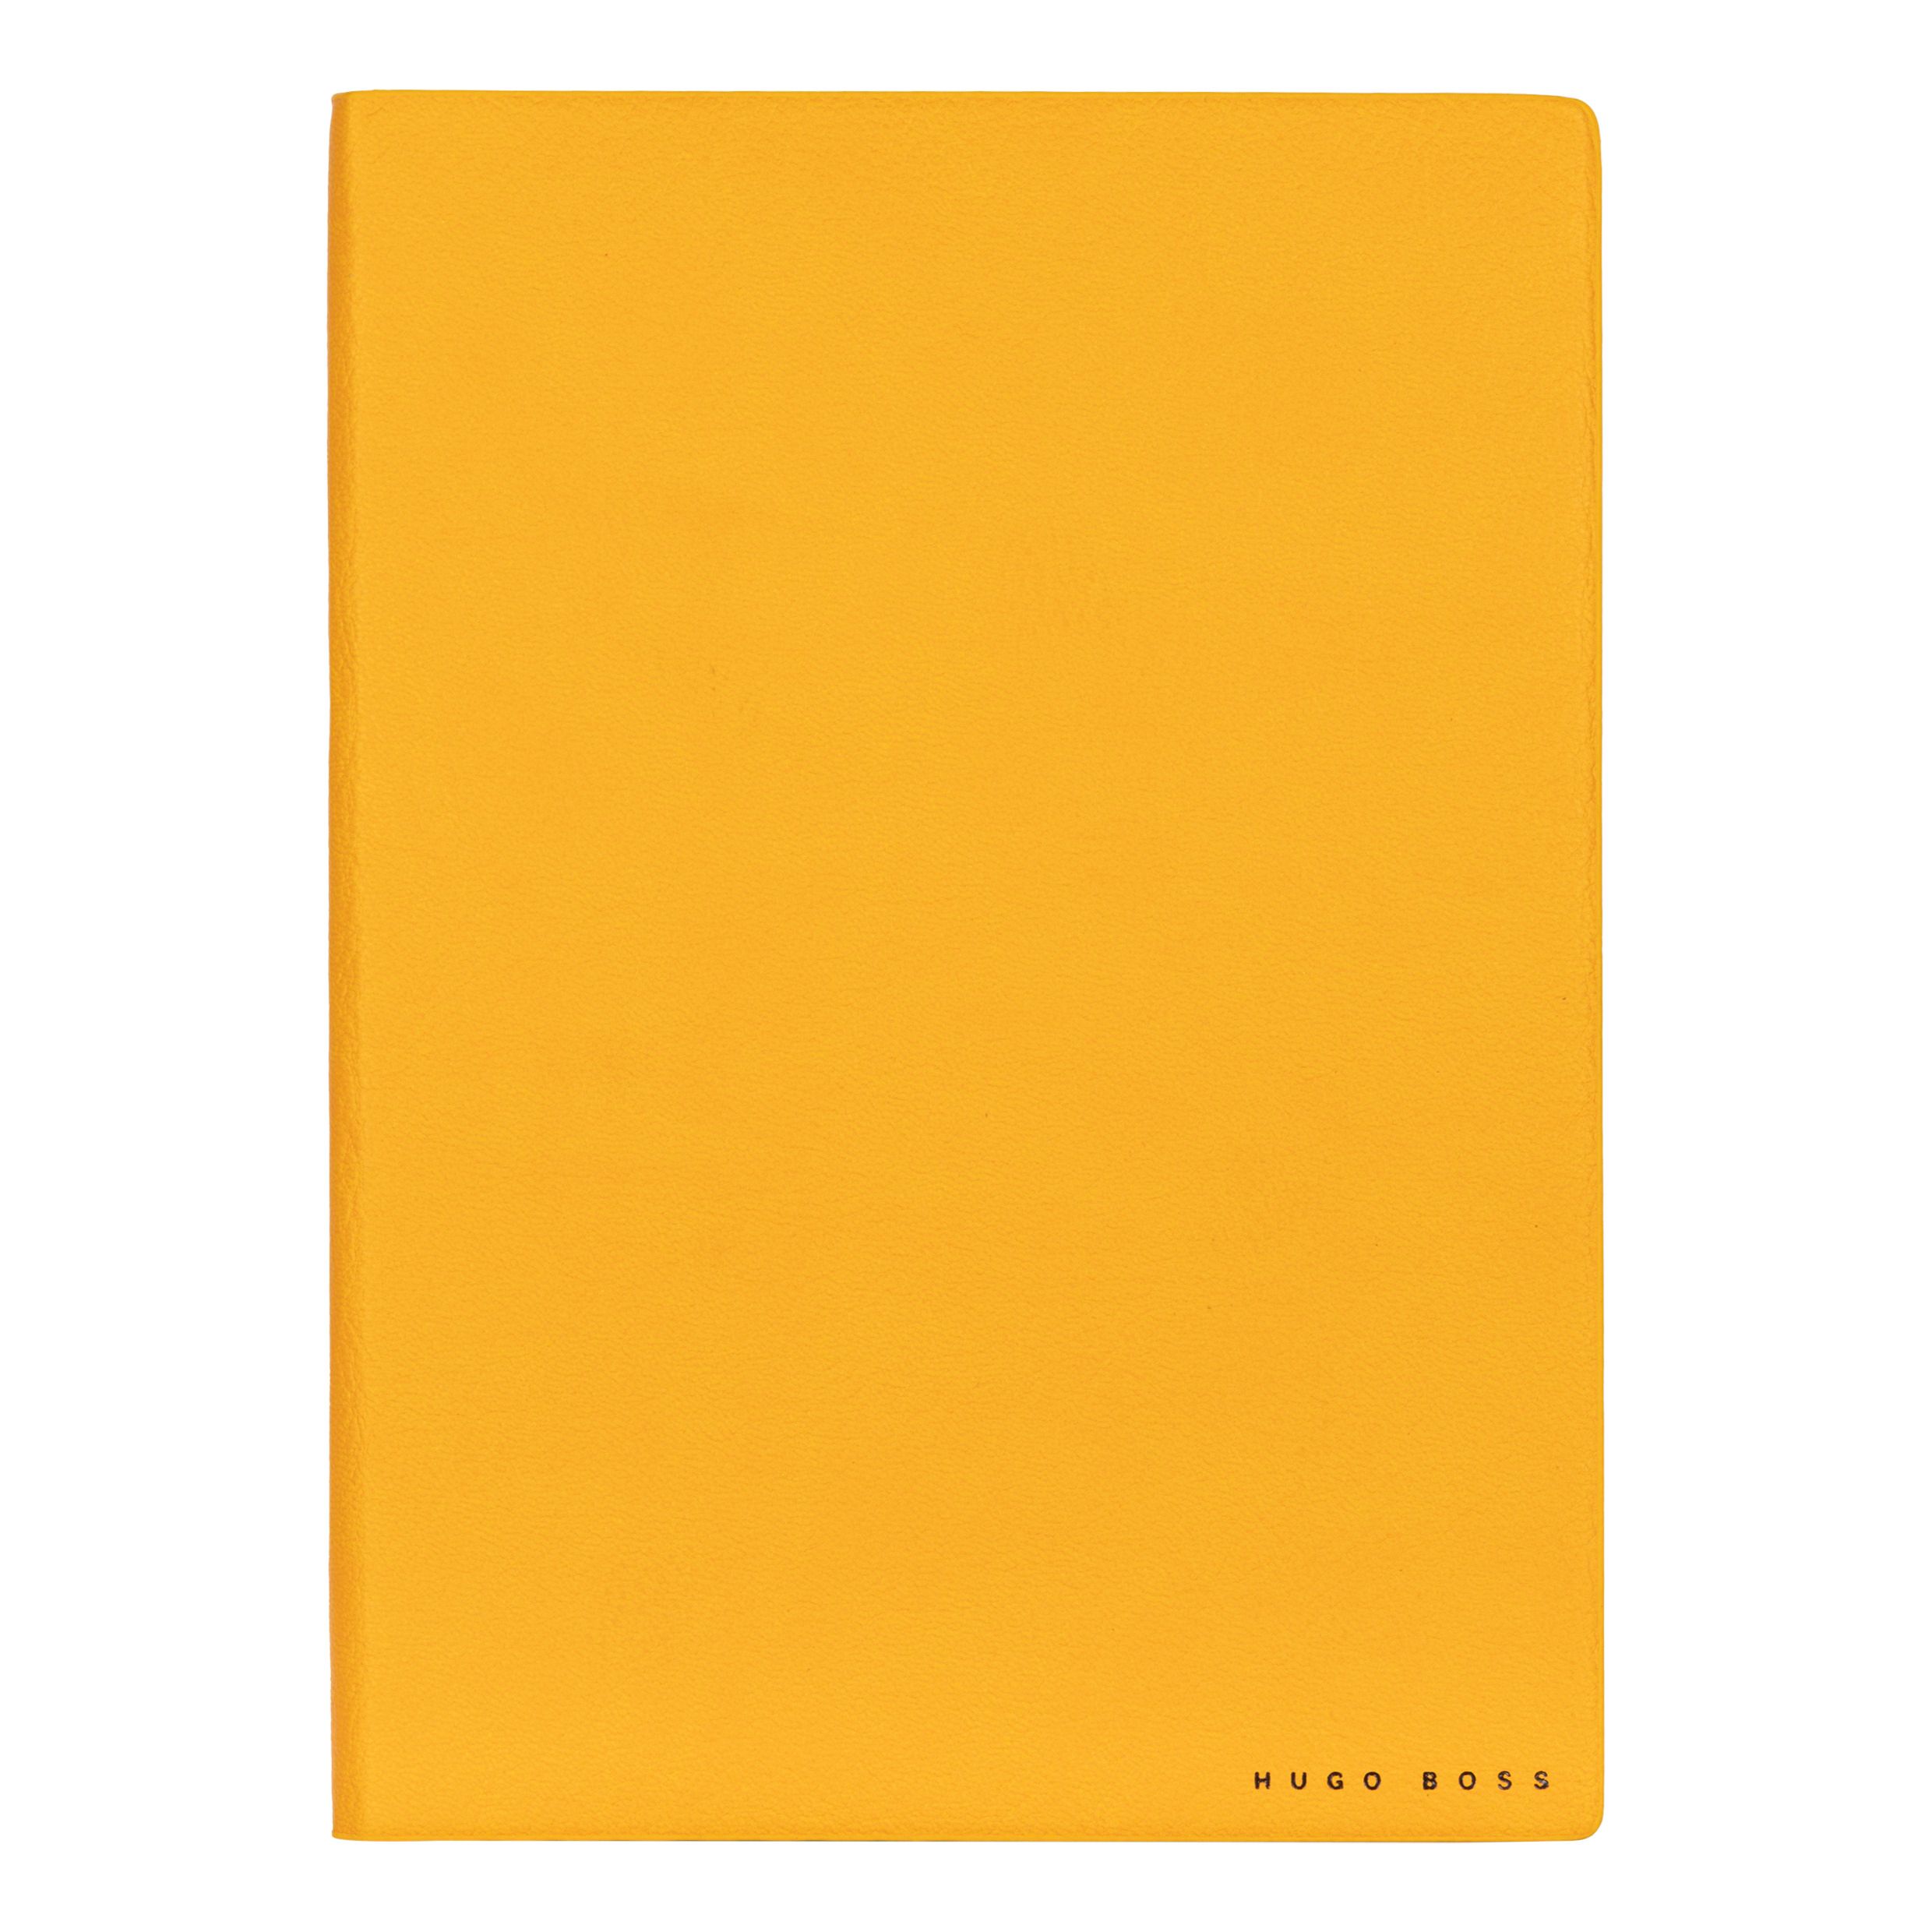 Hugo Boss Notebook A5 Essential Storyline Yellow Lined